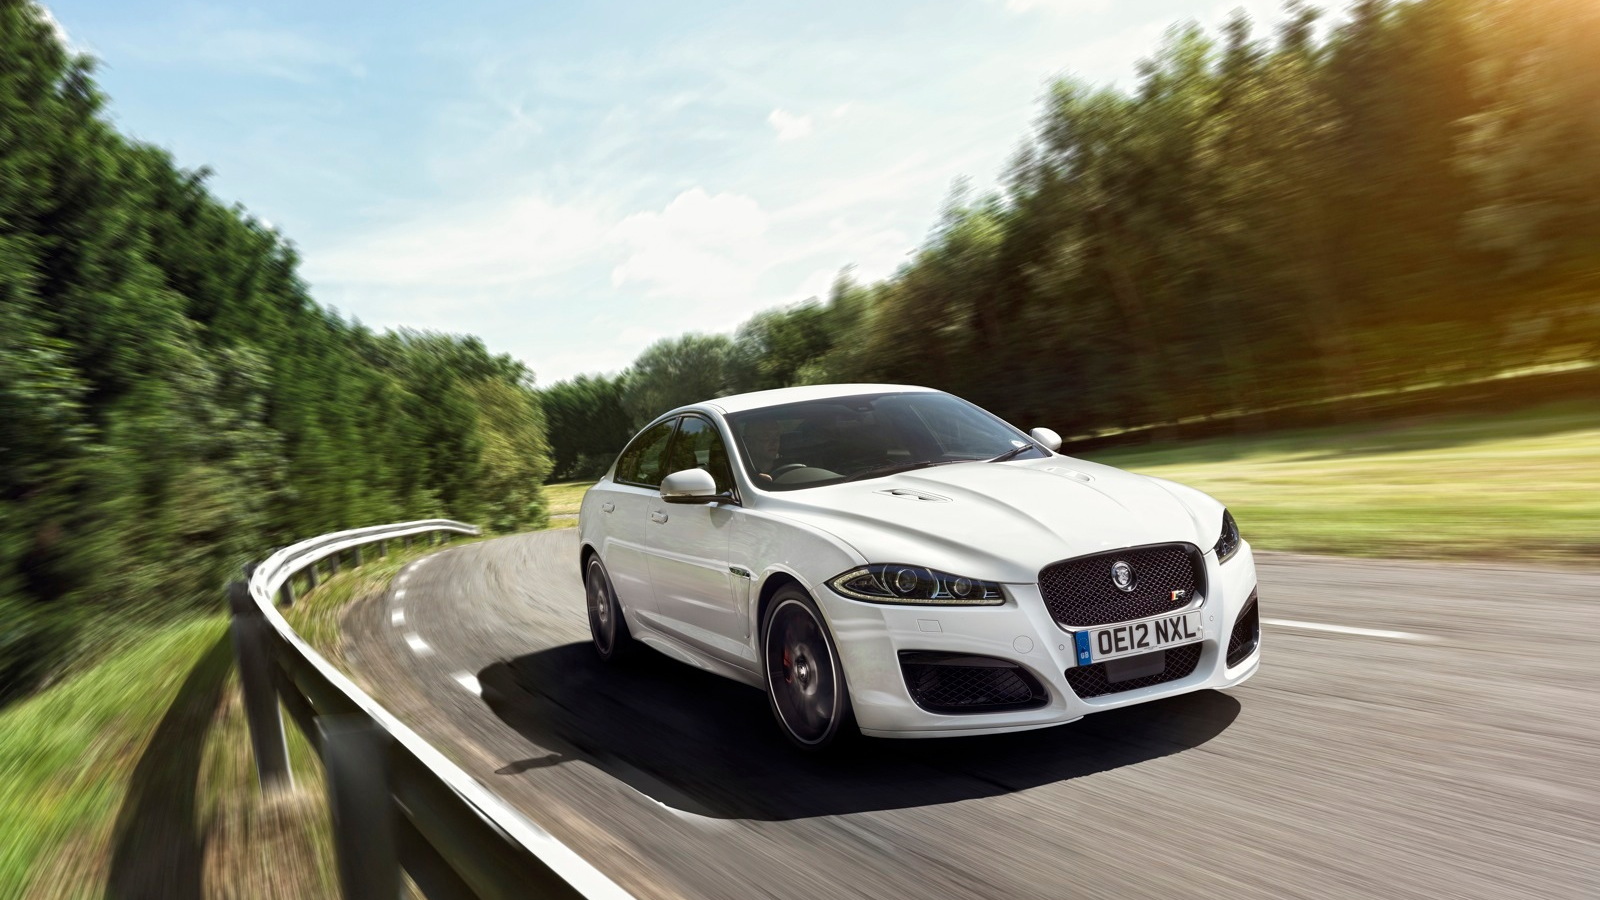 Jaguar's XFR with the Speed Pack option.